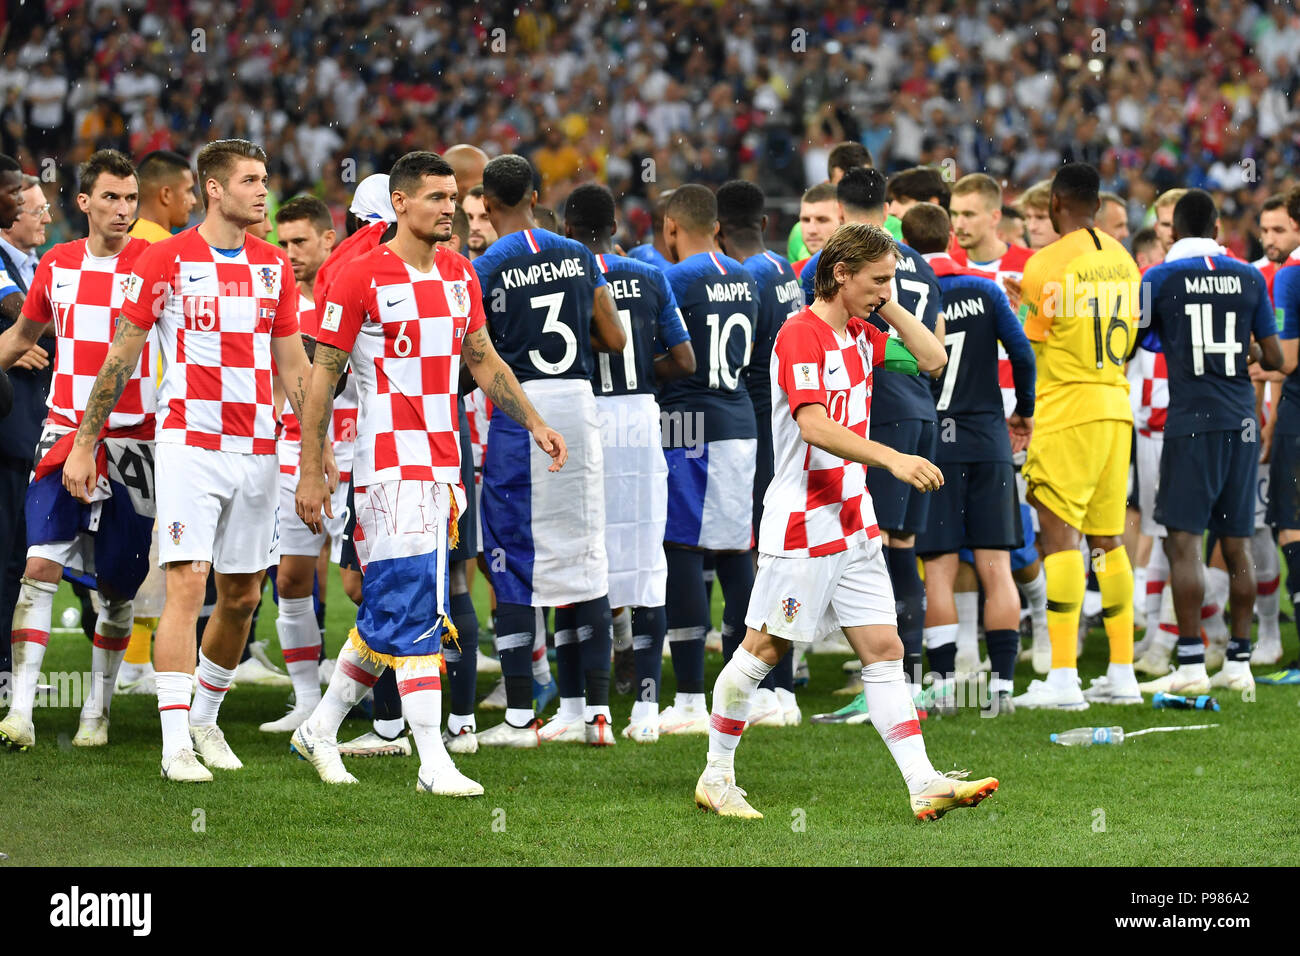 Croatian players at the award ceremony, Victory Ceremony. Disappointment, frustrated, disappointed, frustrated, dejected, Luka MODRIC (CRO), Dejan LOVREN (CRO). Duje CALETA-CAR (CRO). Mario MANDZUKIC (CRO). France (FRA) - Croatia (CRO) 4-2, Final, Game 64, on 15.07.2018 in Moscow; Luzhniki Stadium. Football World Cup 2018 in Russia from 14.06. - 15.07.2018. | usage worldwide Stock Photo